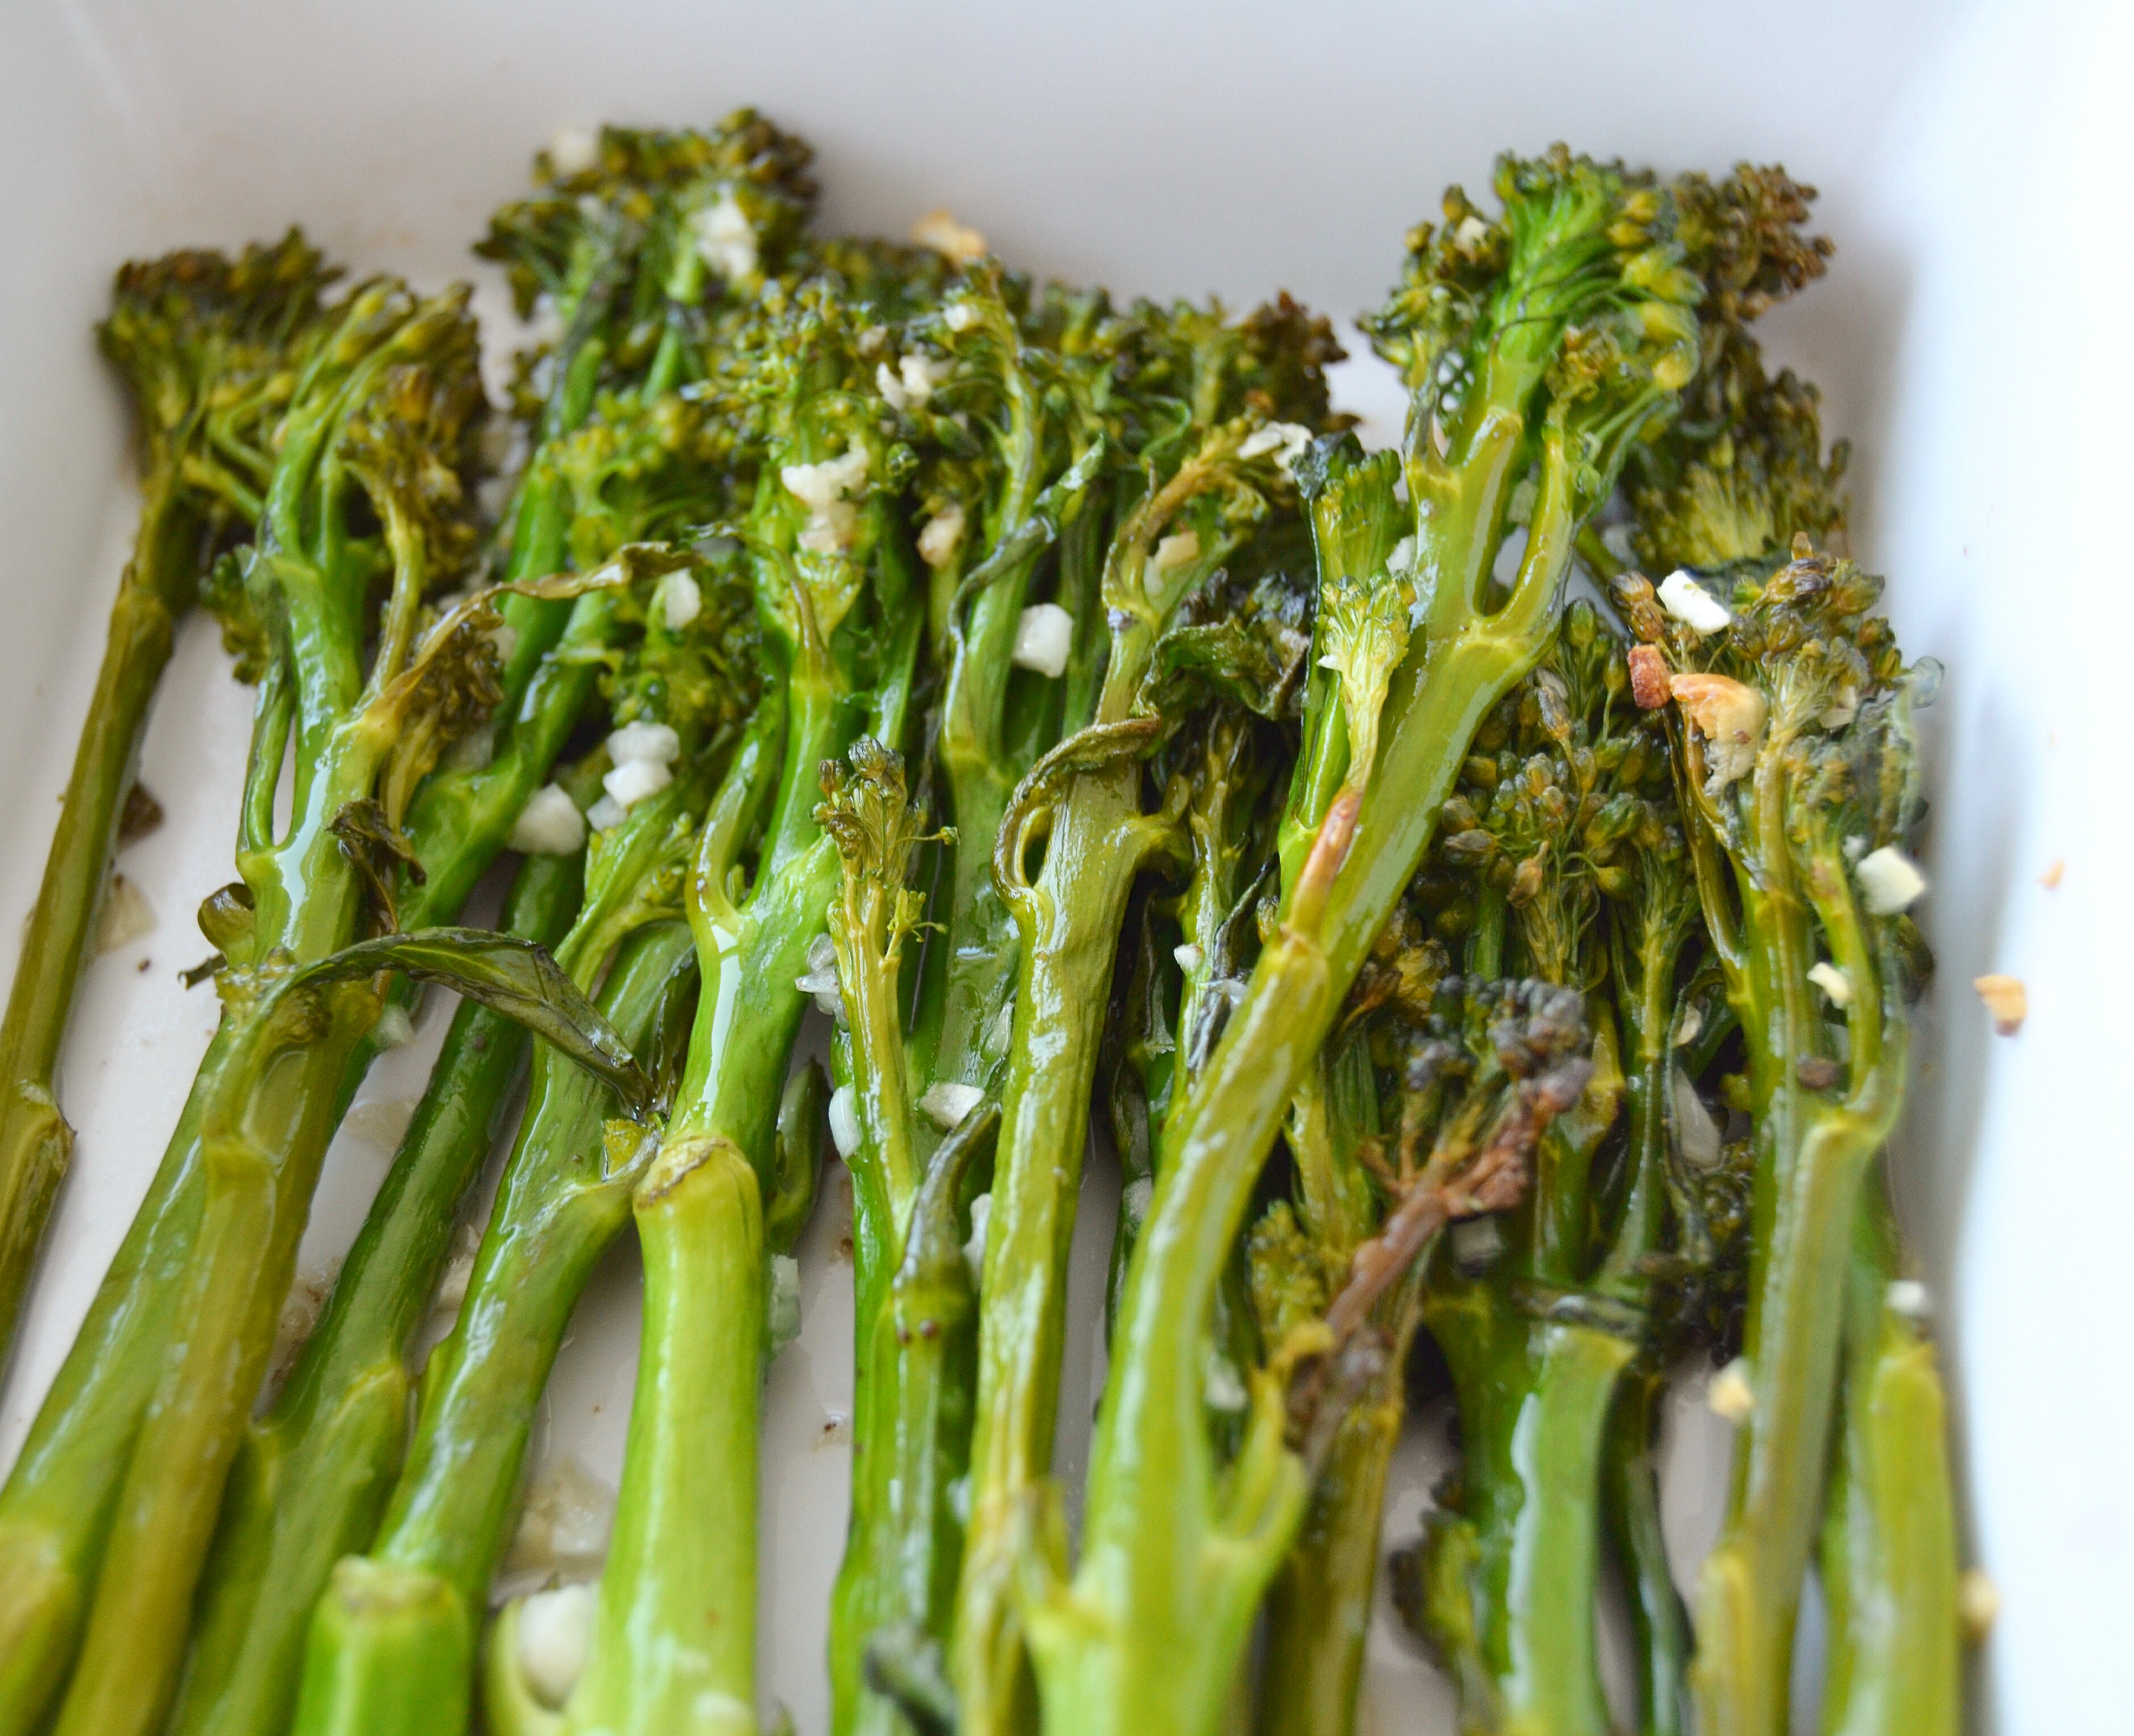 Eat your greens: Coconut Oil Garlic Roasted Broccoli